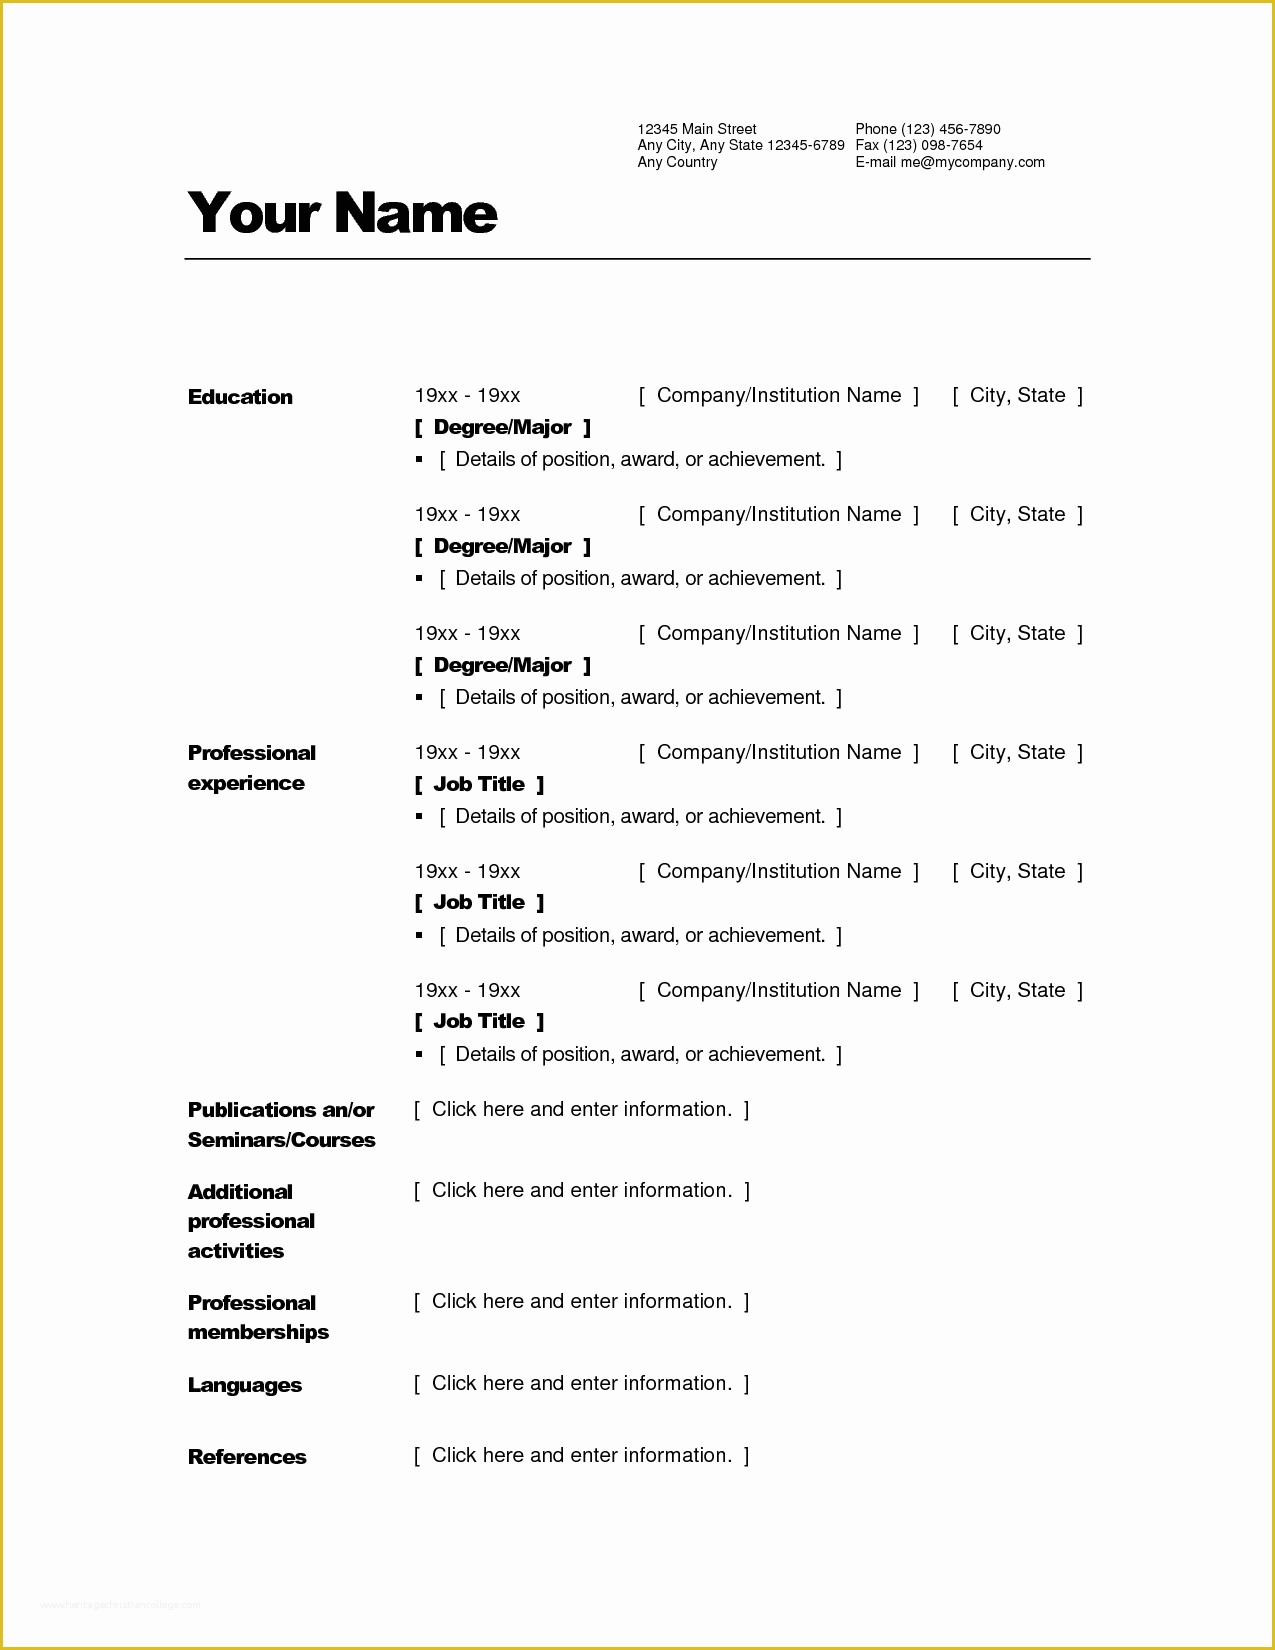 Resume Template Free Download Doc Of Professional Resume format Doc